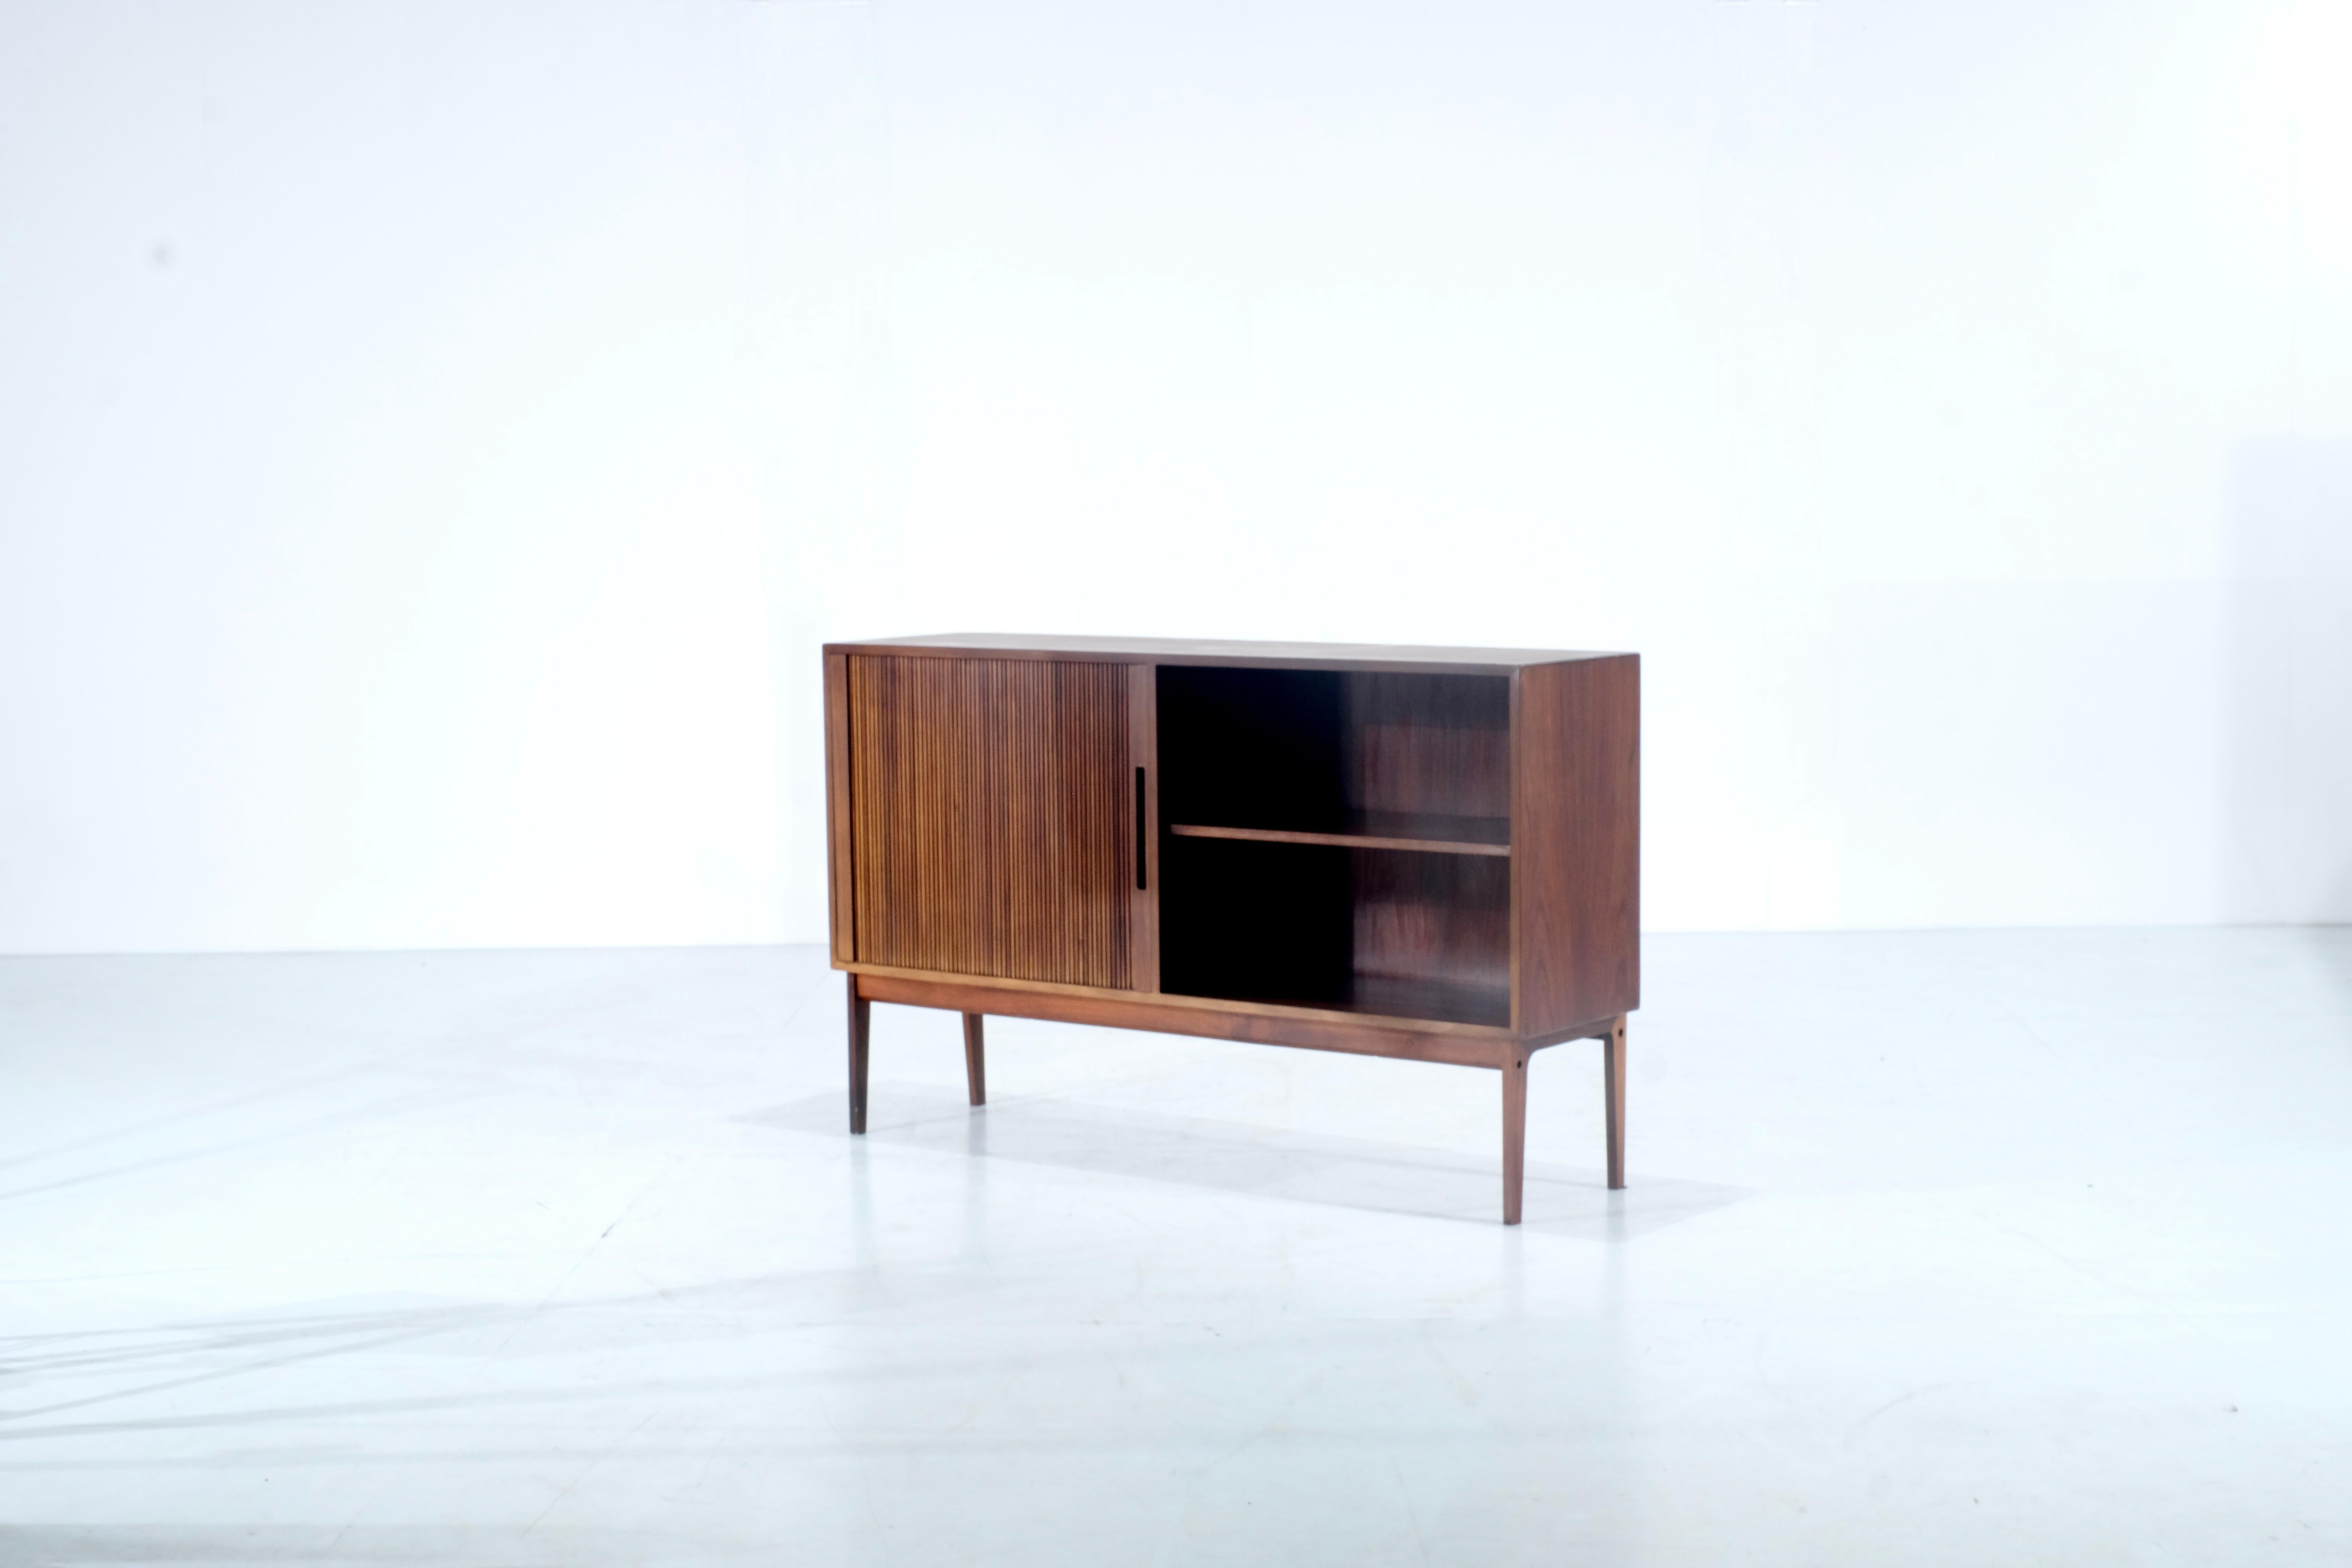 Amazing italian sideboard from 1970
this great shaped sideboard has a sliding wooden door and the other side has no door  which bring an amazing design. This type of sliding door reminds us of Frattini furniture. ( Note that this sideboard is not